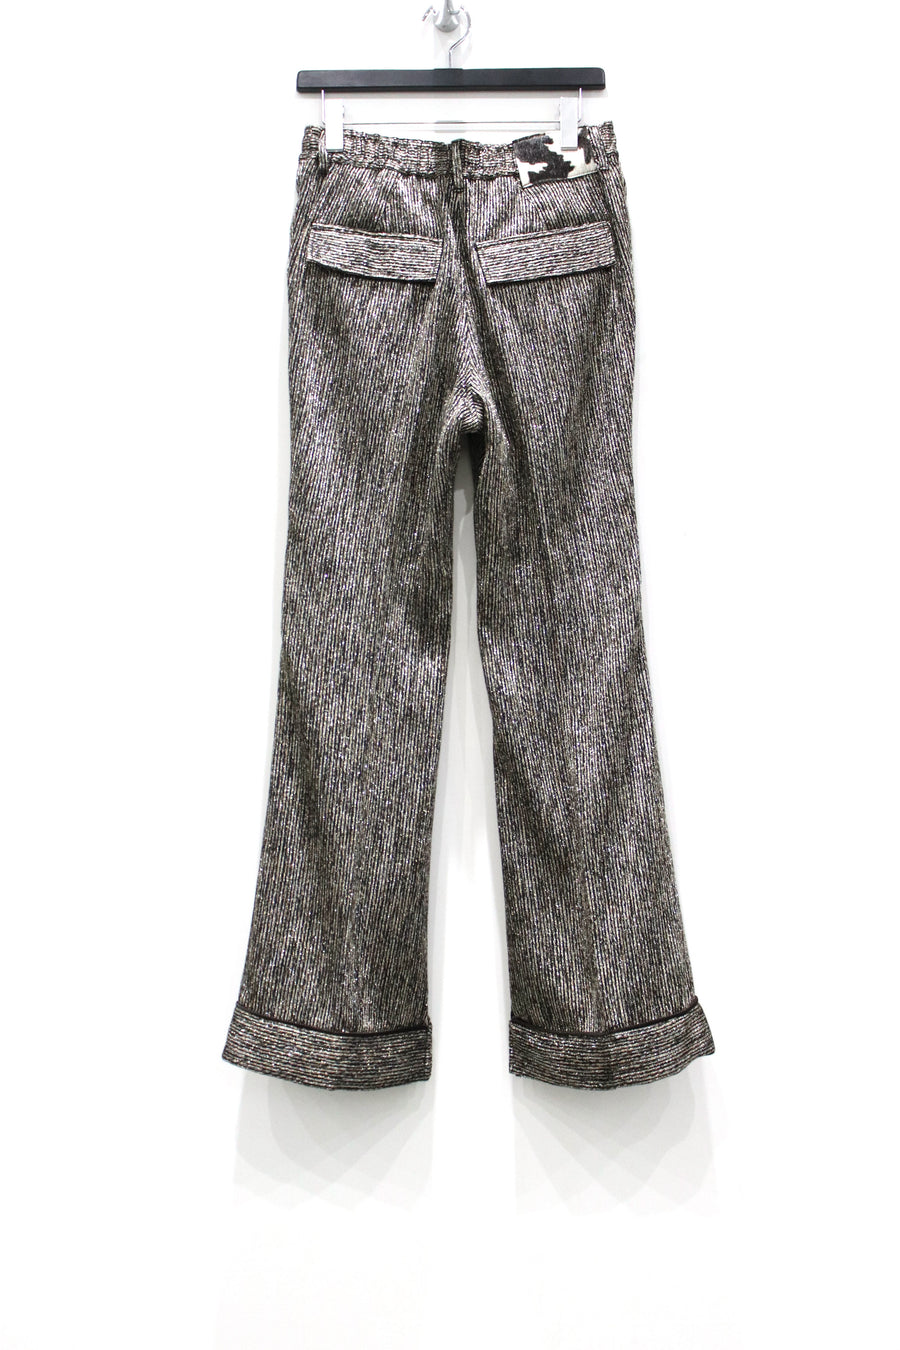 BED j.w. FORD  Glitter Flare Pants(SILVER)